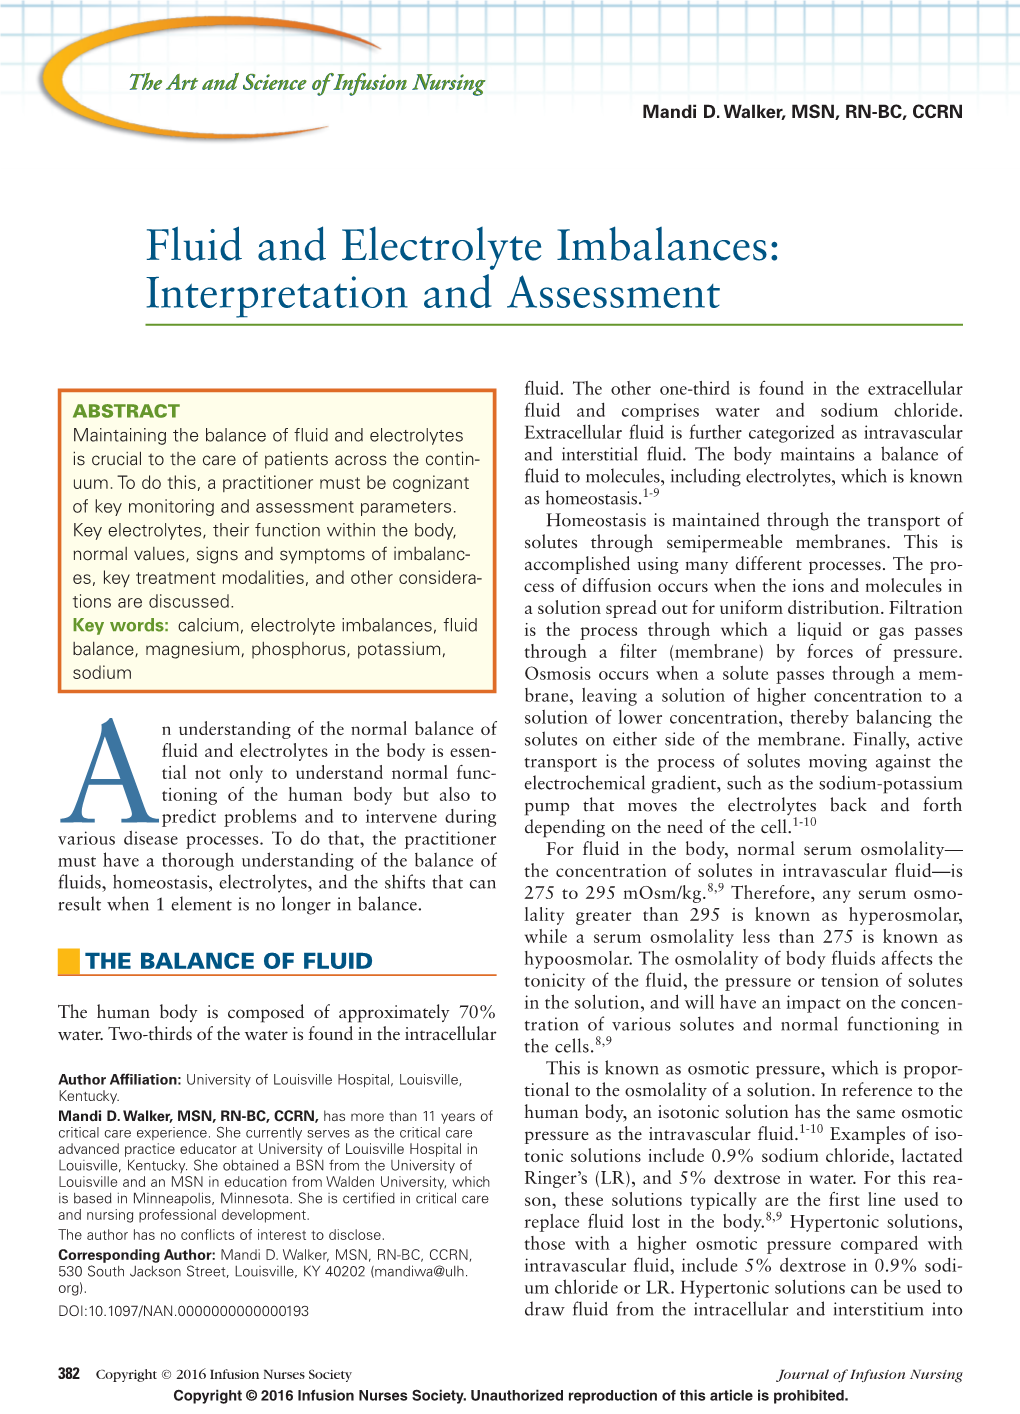 Fluid and Electrolyte Imbalances: Interpretation and Assessment